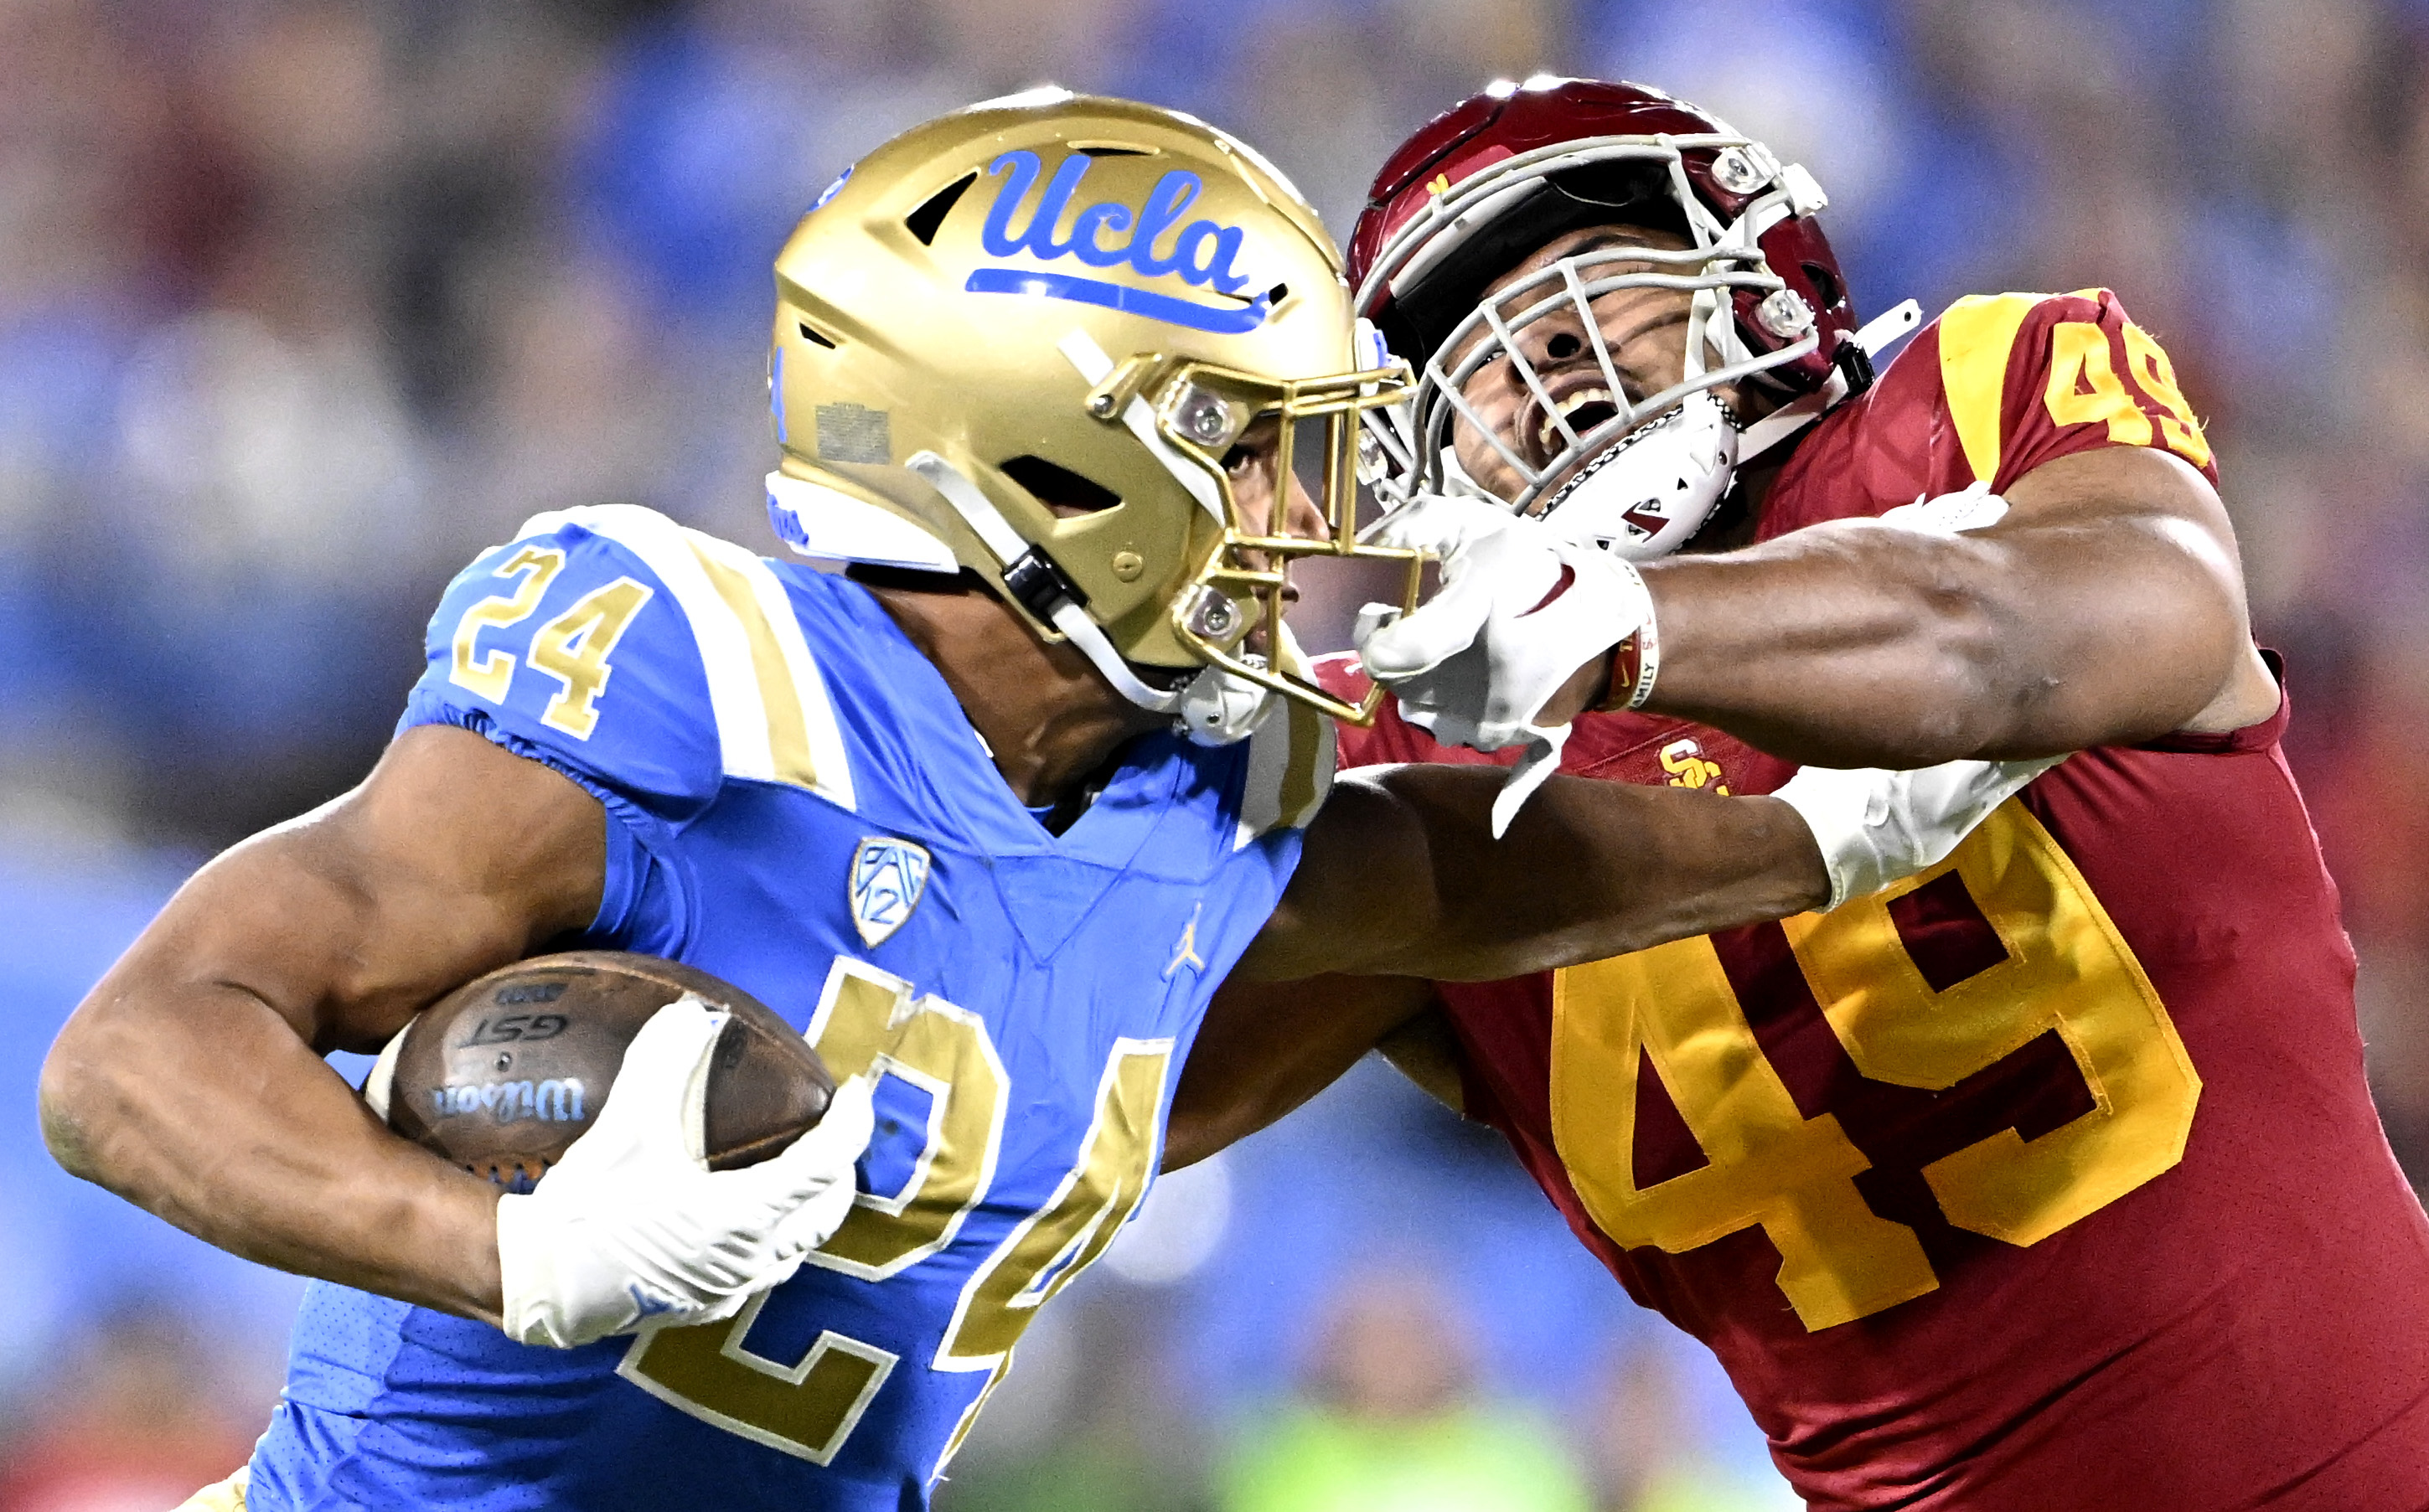 USC Trojans defeated the UCLA Bruins 48-45 during a NCAA Football game at the Rose Bowl.